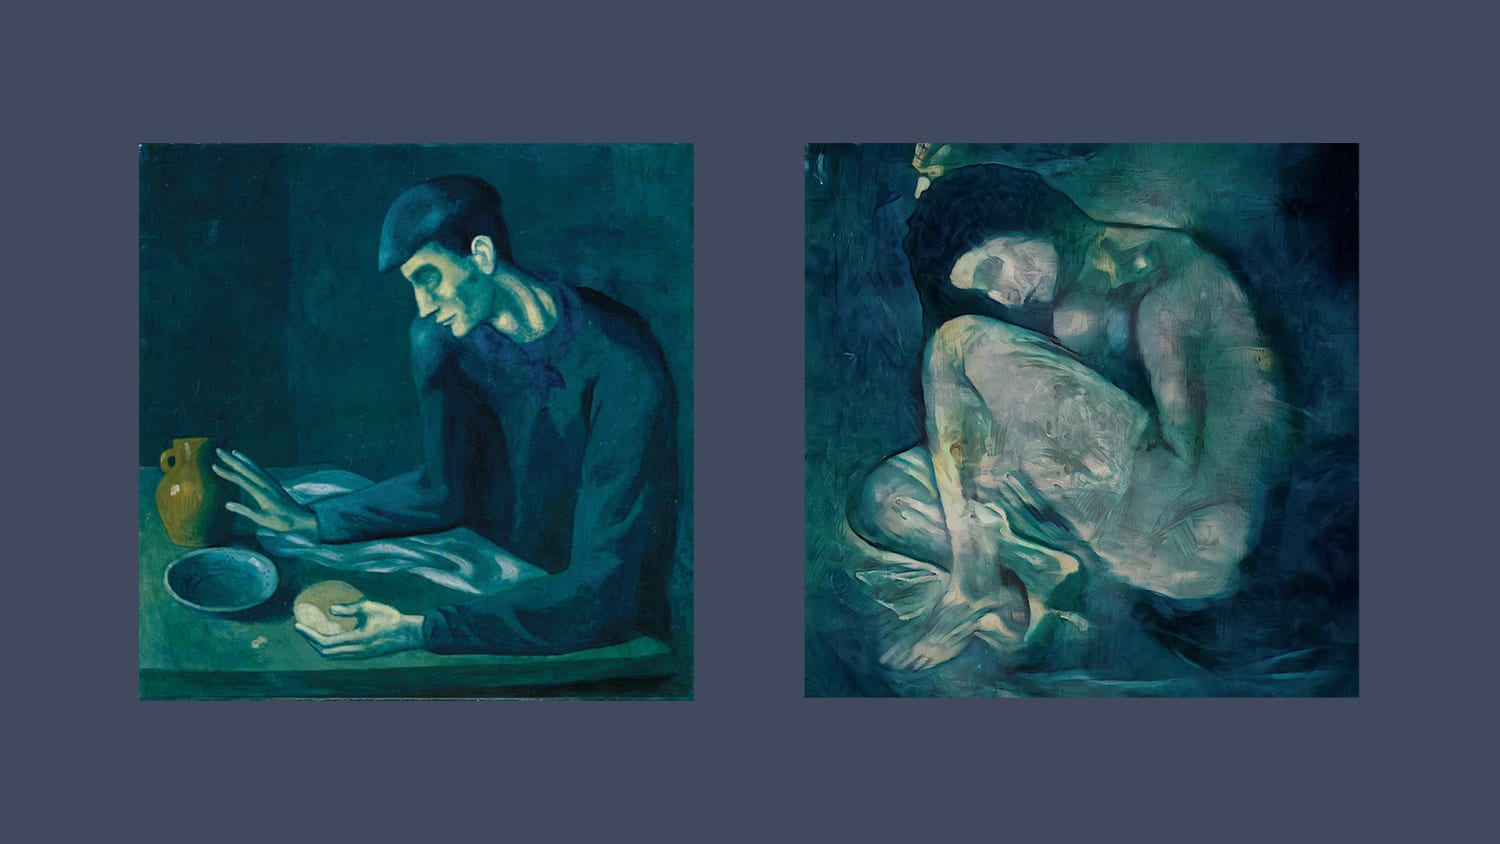 New tech recreated an old, lost Picasso painting. But there’s a problem.